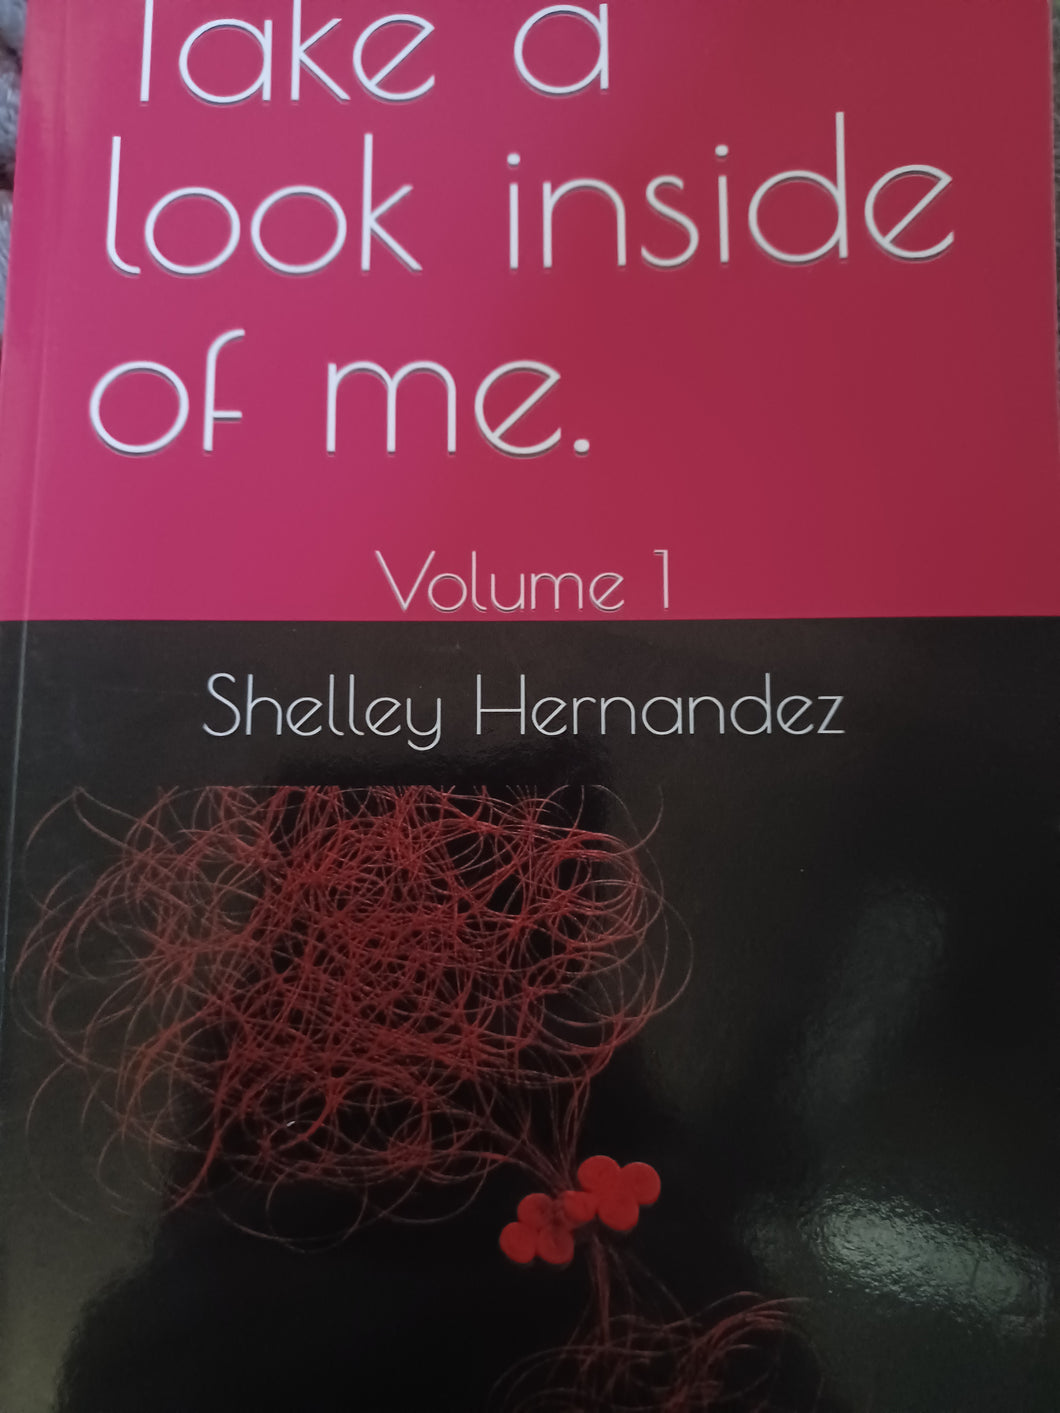 Take a look inside of me Volume 1